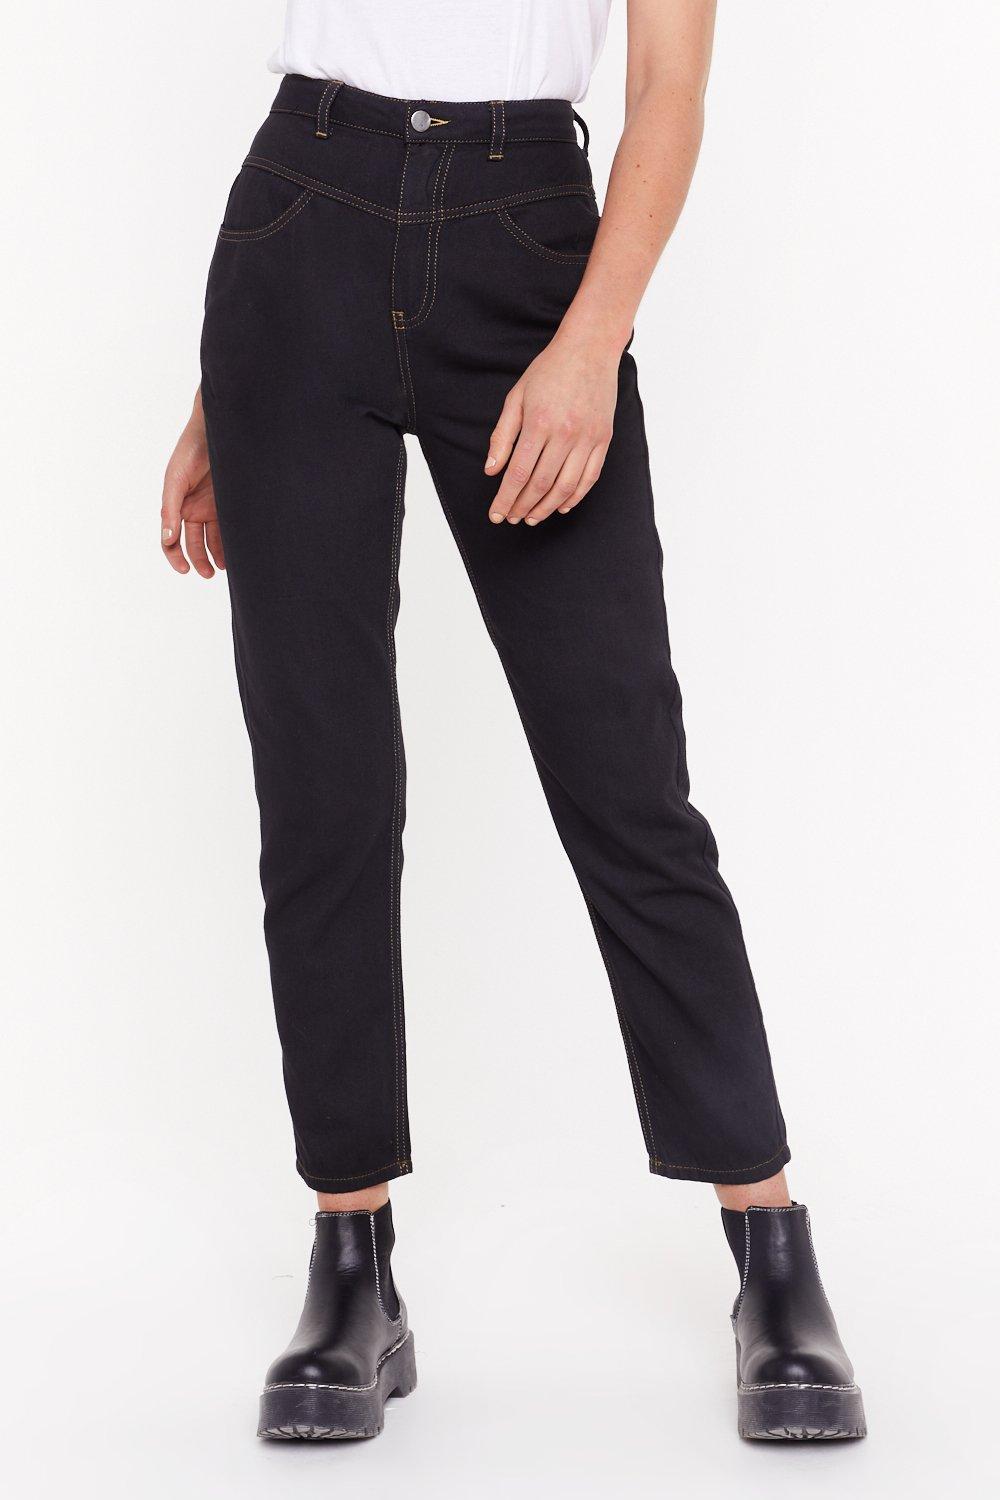 black jeans with white stitching